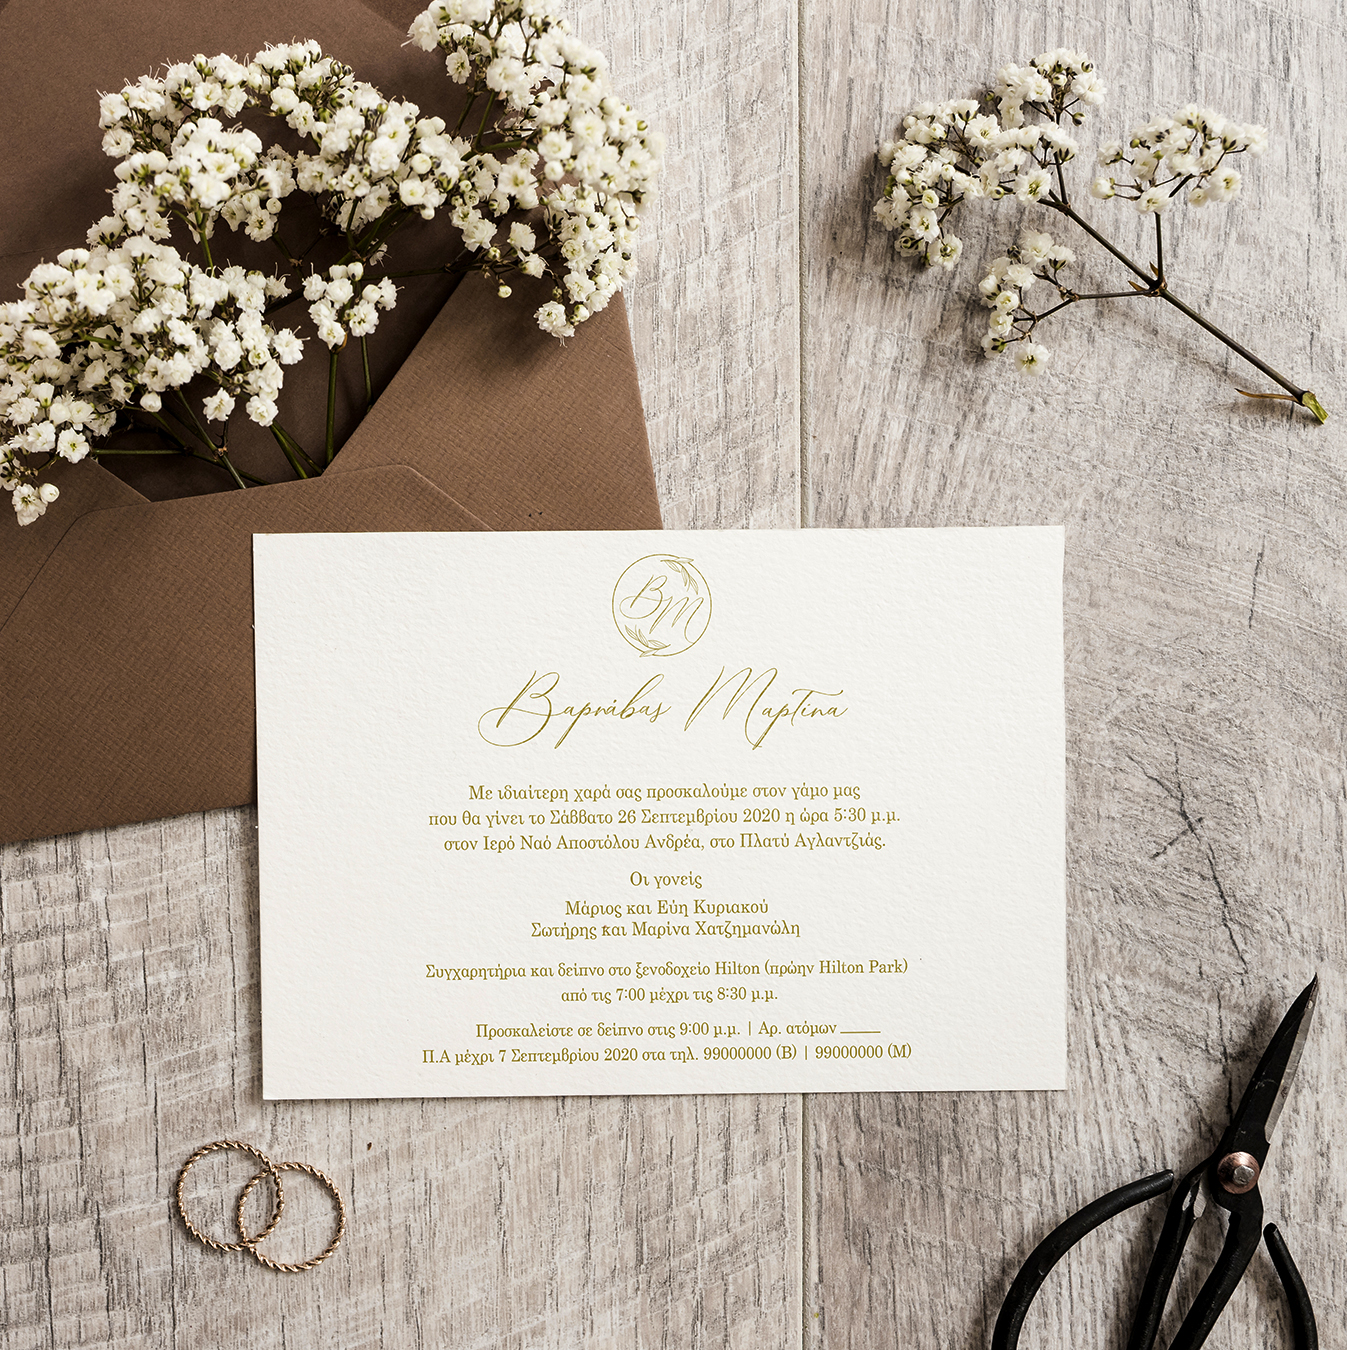 Wedding invitation printed on a textured cream color paper with gold test. Set on a wooden surface over a brown envelope with white flowers and two rings.